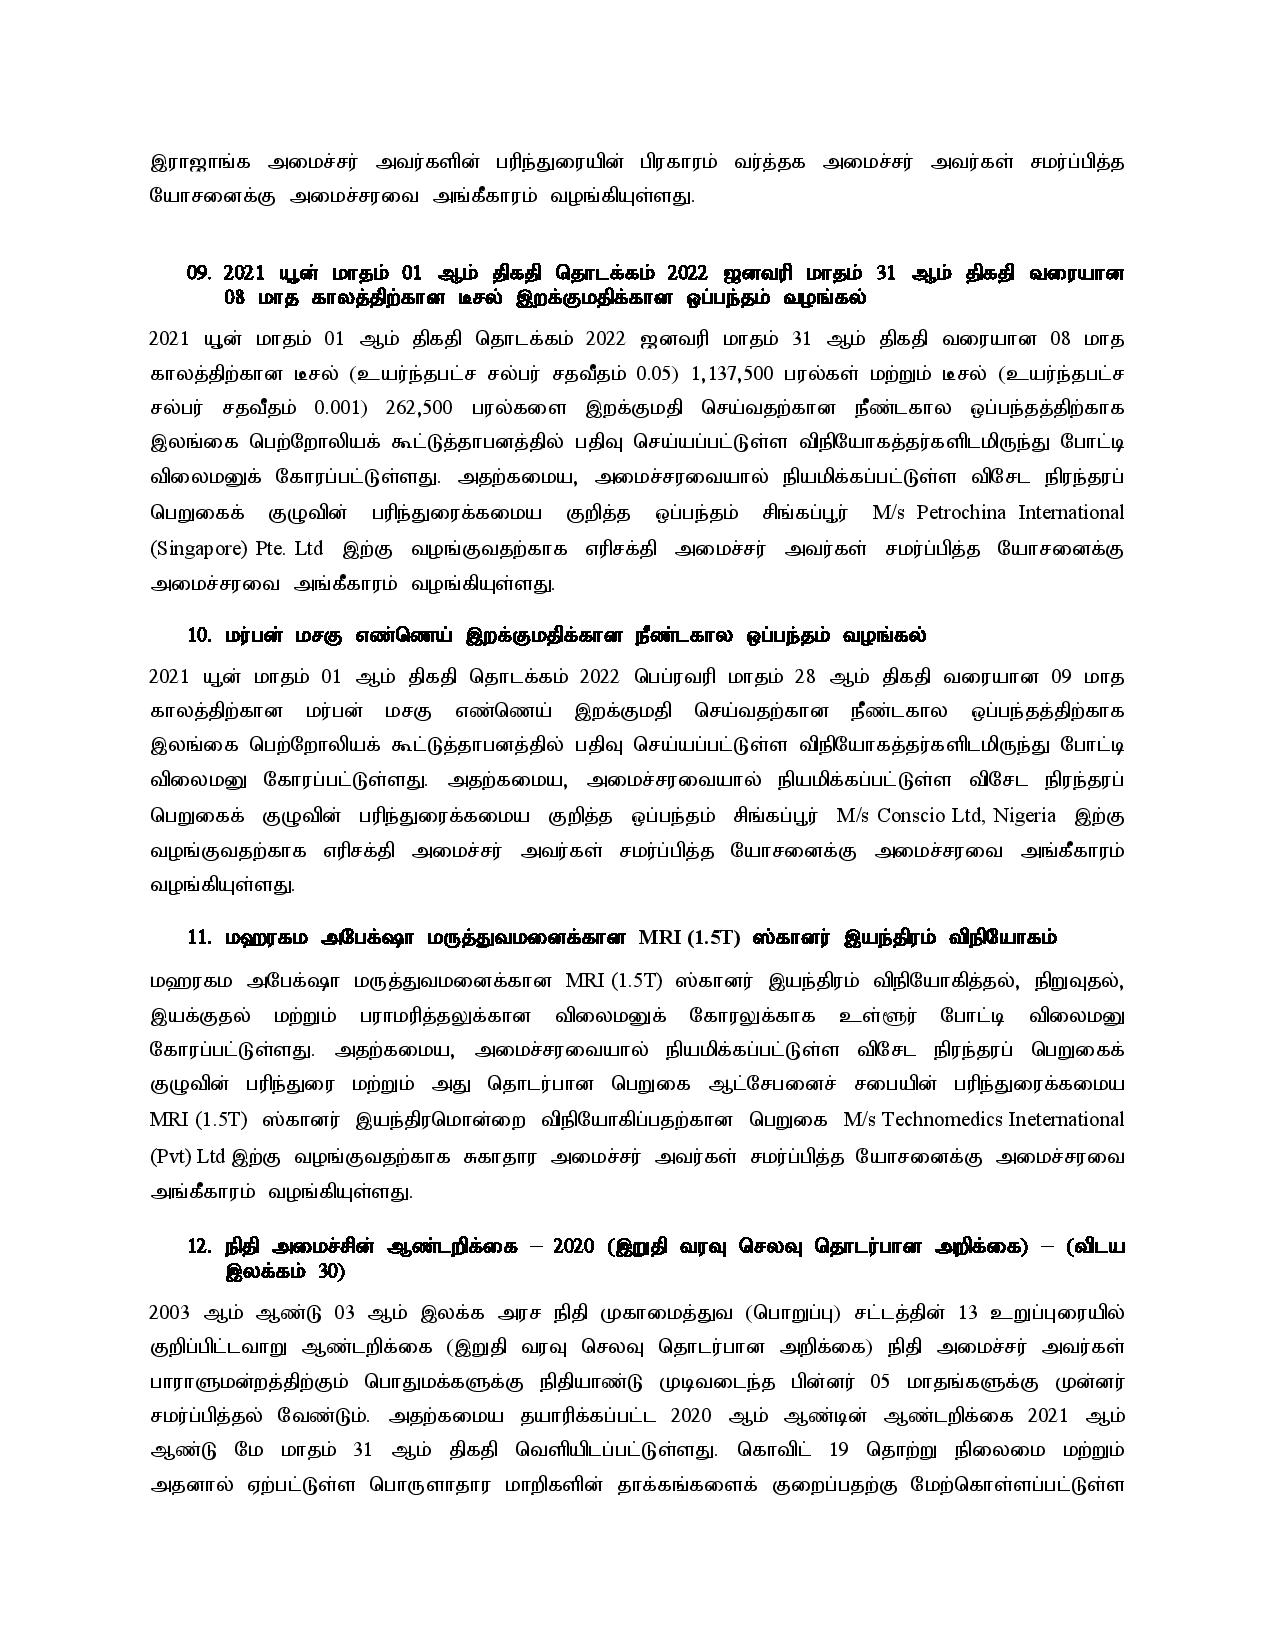 Cabinet Decisions 14.06.2021 Tamil page 004